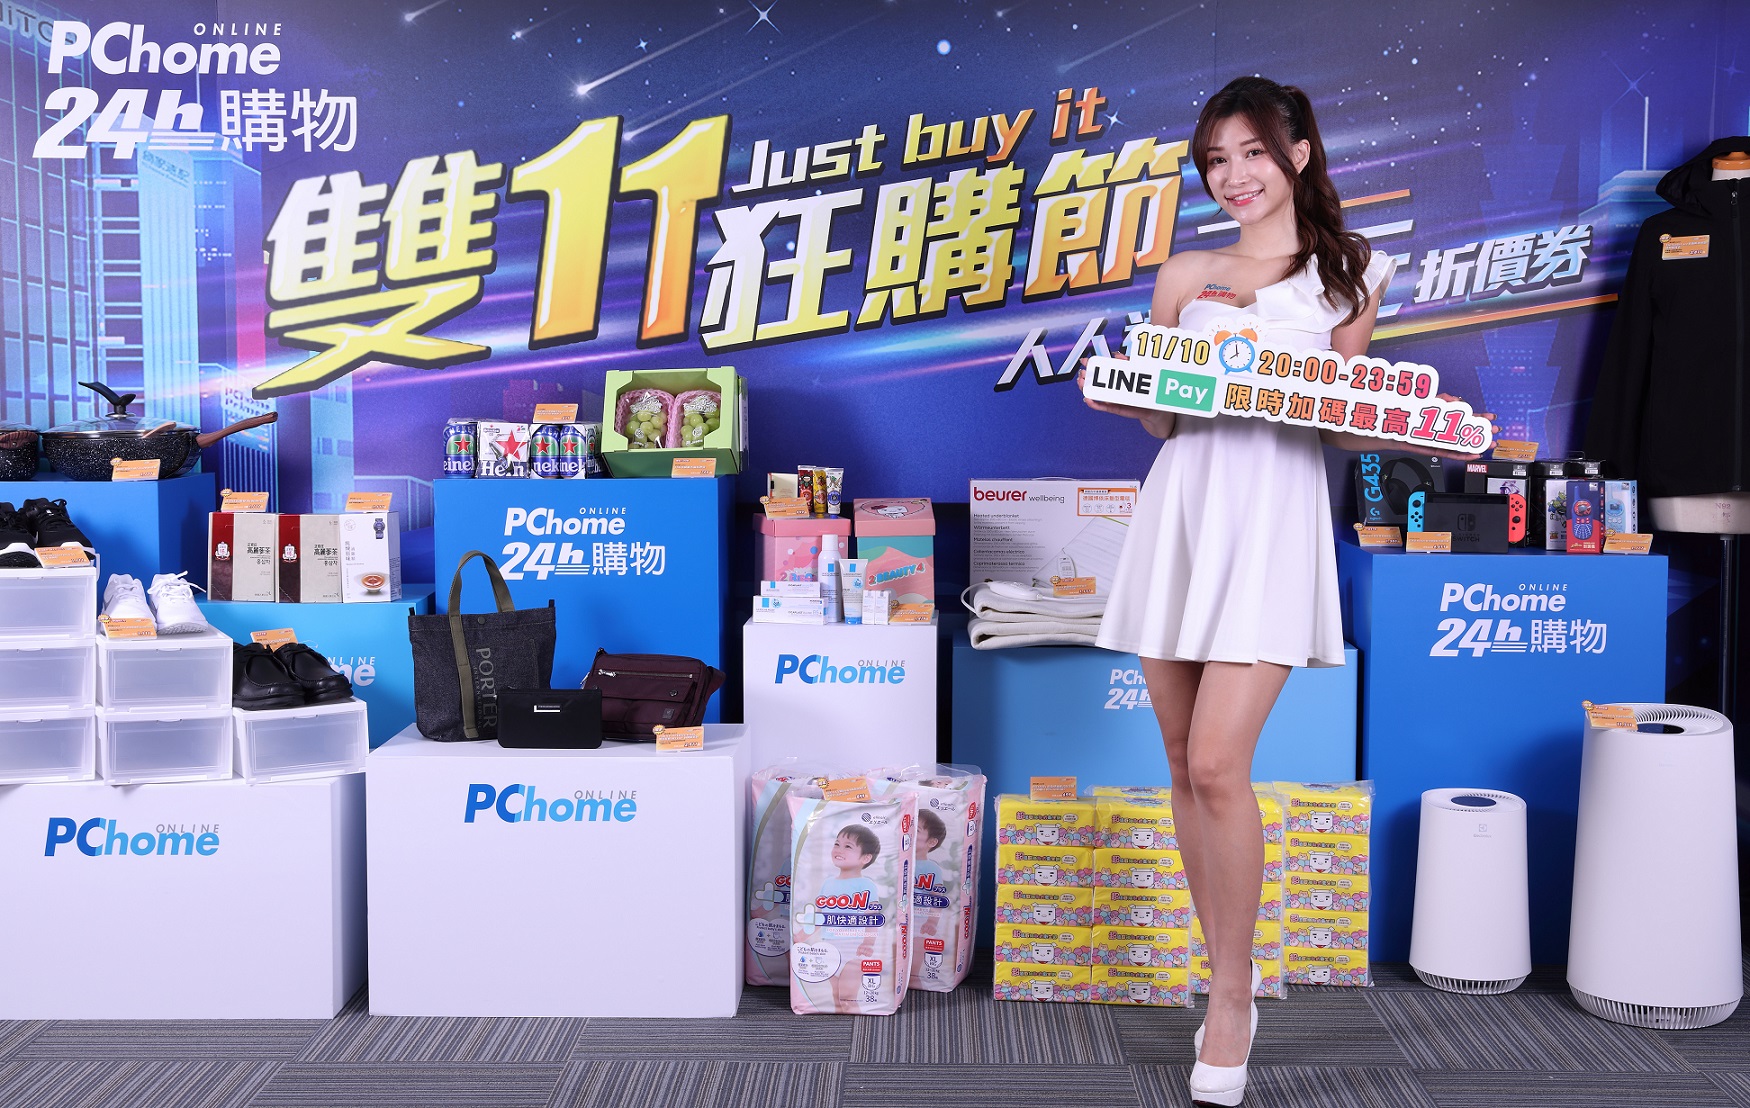 TOP 5 Best Selling Items on Double 11 Super Brand Day at PChome 24h Shopping Sales of Gaming, Commodities, Outdoor Goods, 3C Products, and Healthcare Items of Well-Known Brands Doubles